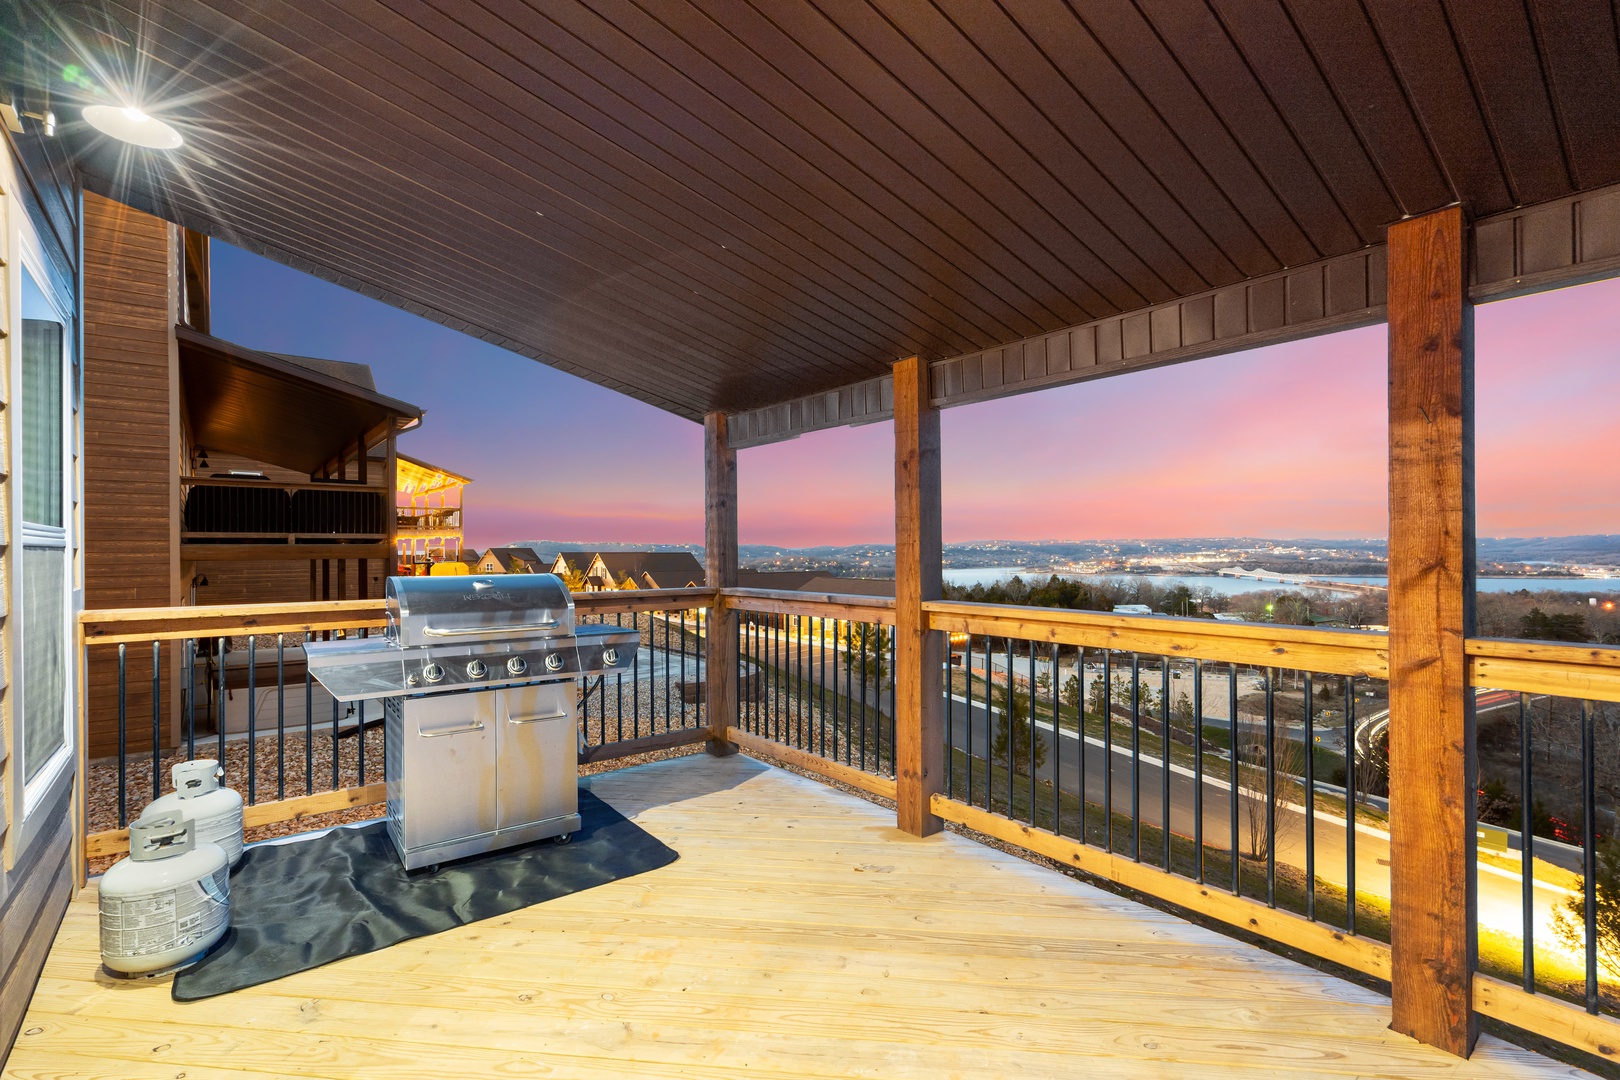 Grill up your favorite meals on the the large top deck